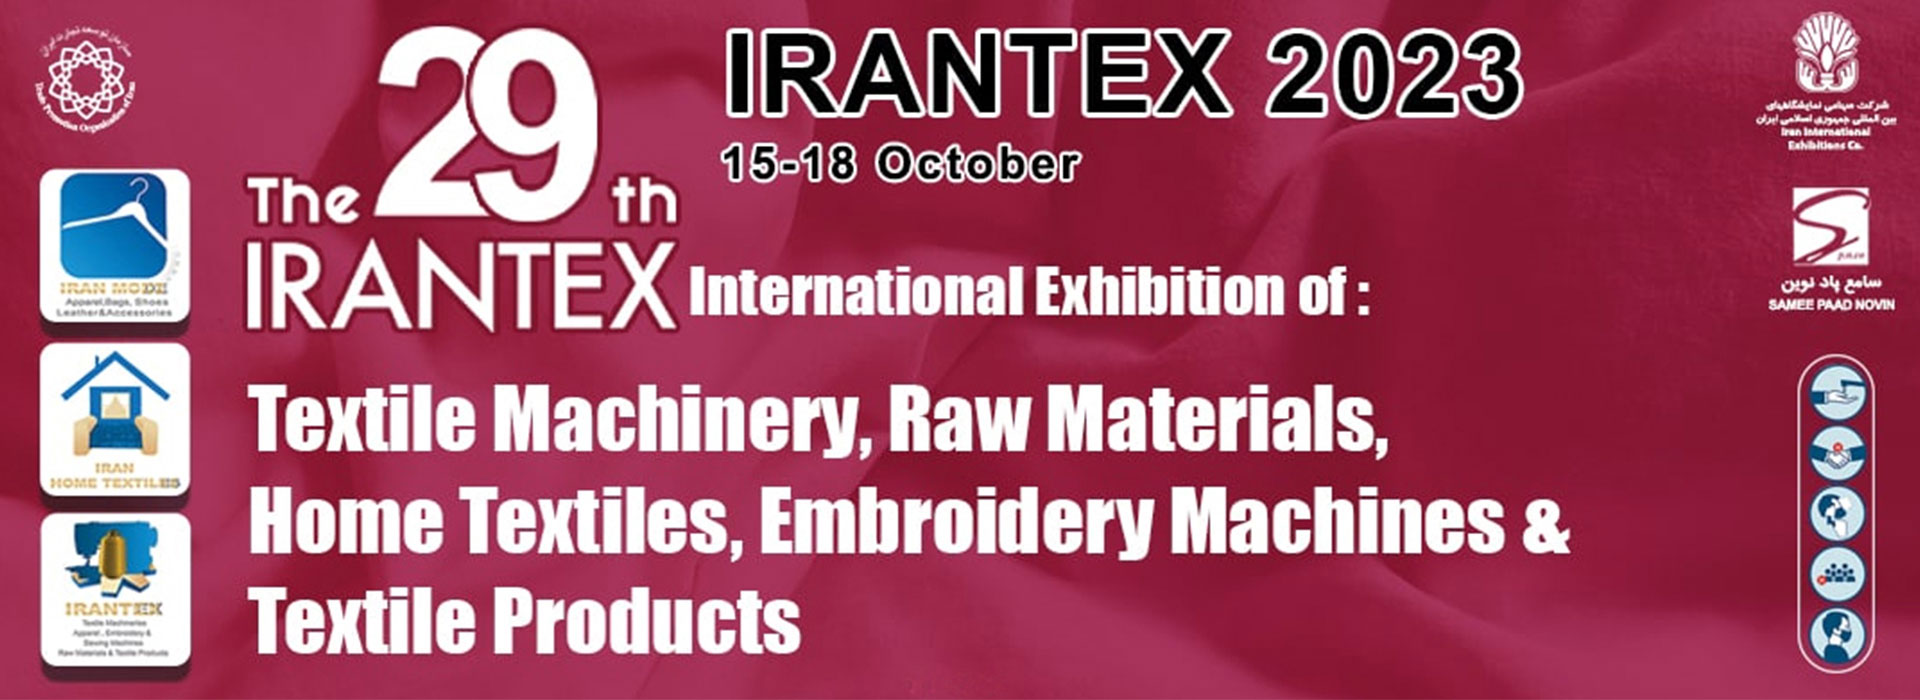 irantex 2023 - The 29th IRANTEX – International Exhibition of Textile Machinery, Raw Materials, Home Textiles, Embroidery Machines & Textile Products 2023